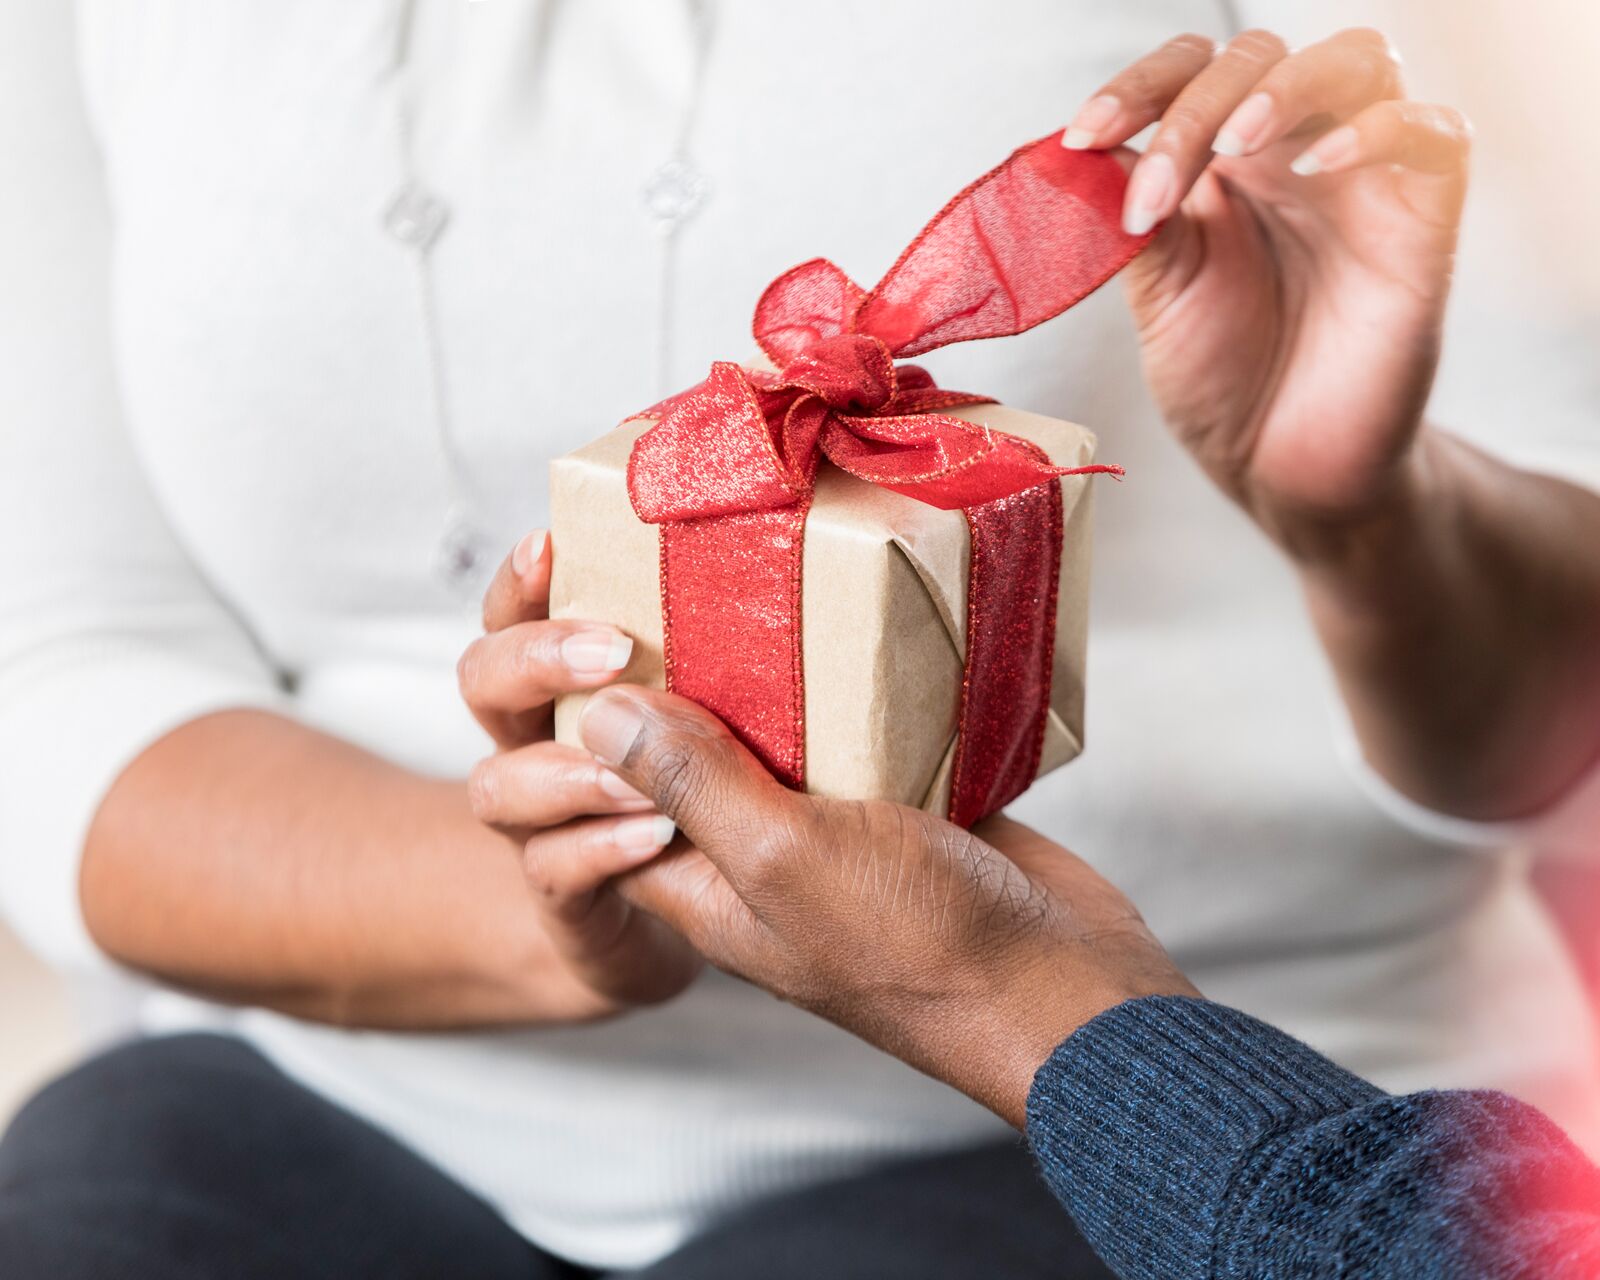 60 Romantic Gifts for Your Wife